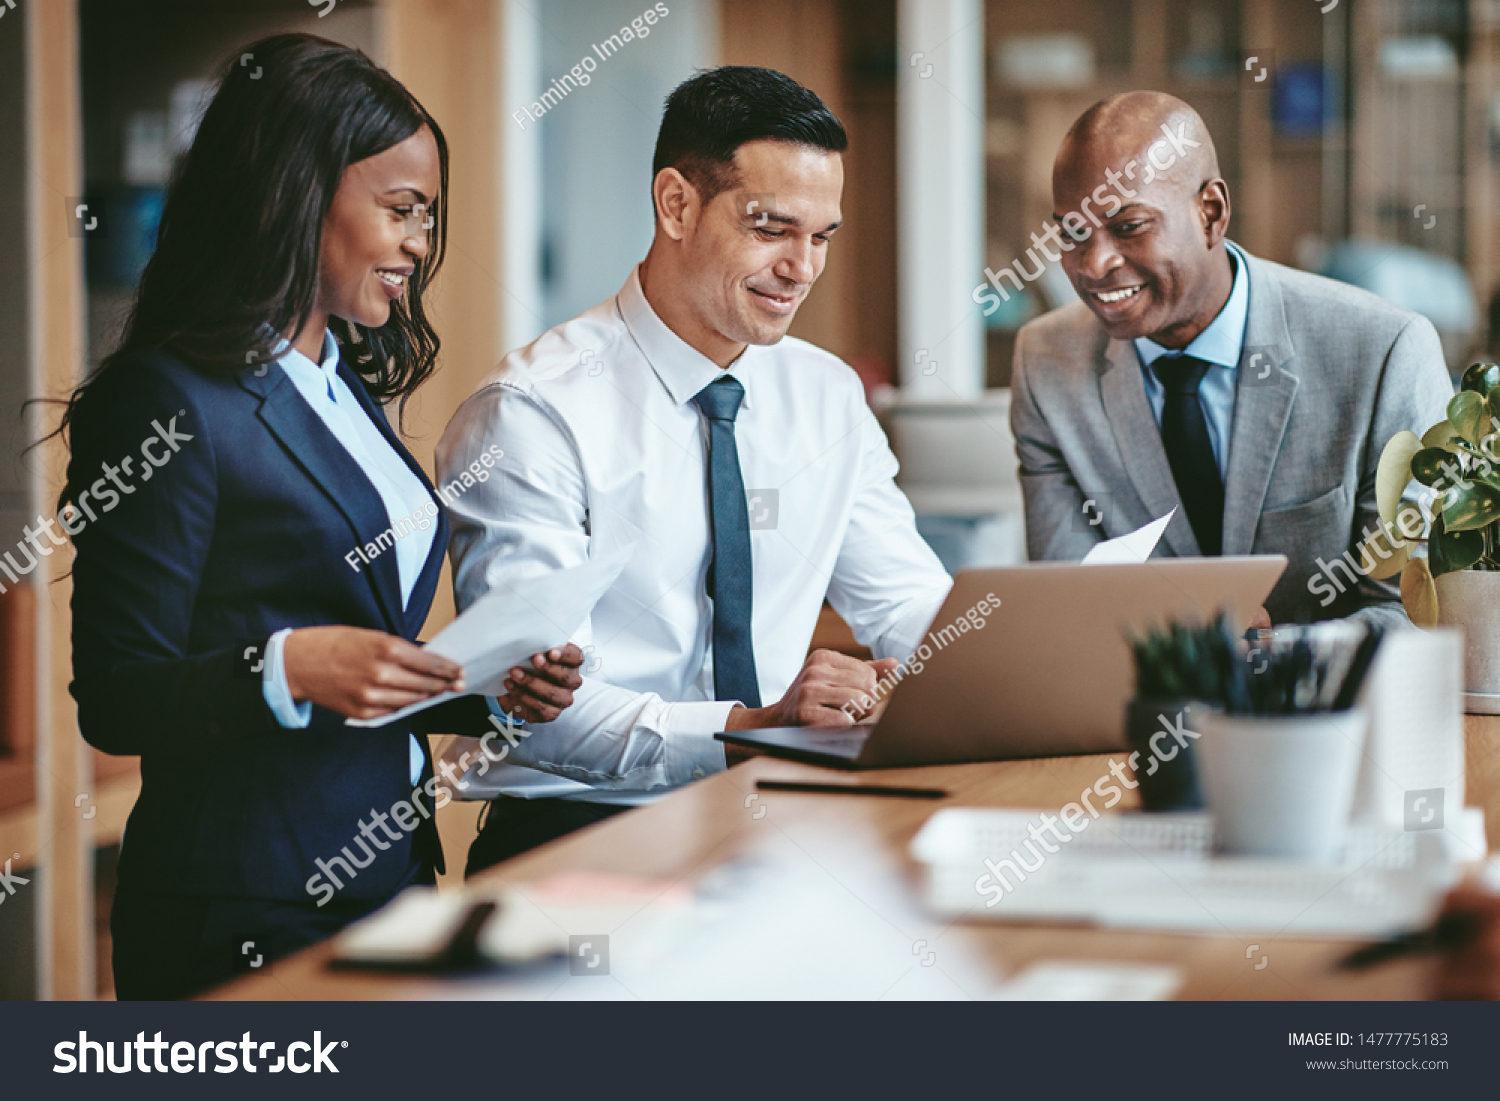 Smiling group of diverse businesspeople going over paperwork together and working on a laptop at a table in an office #1477775183